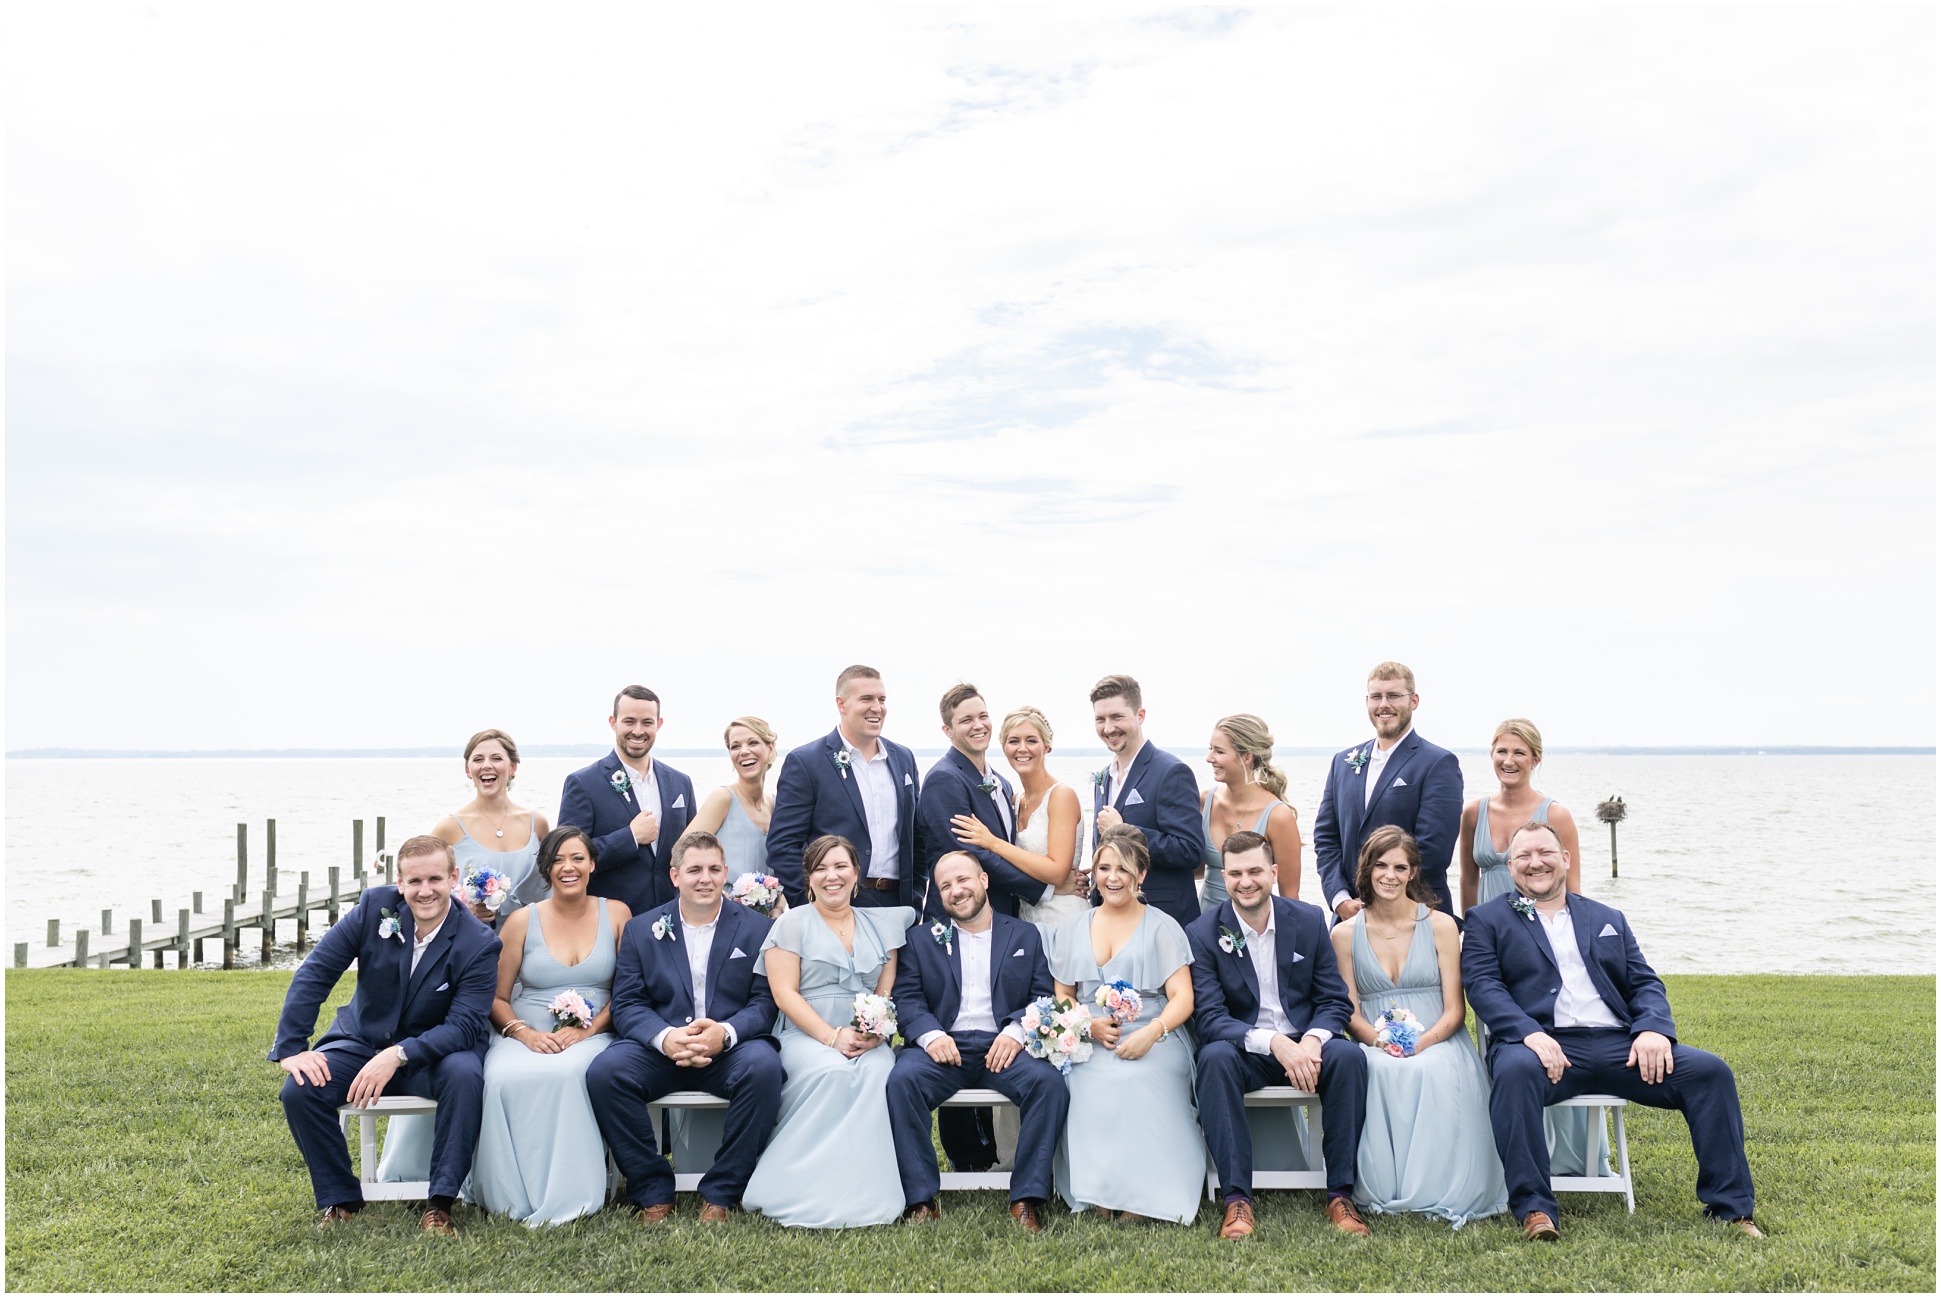 Full bridal party by the water at weatherly farm